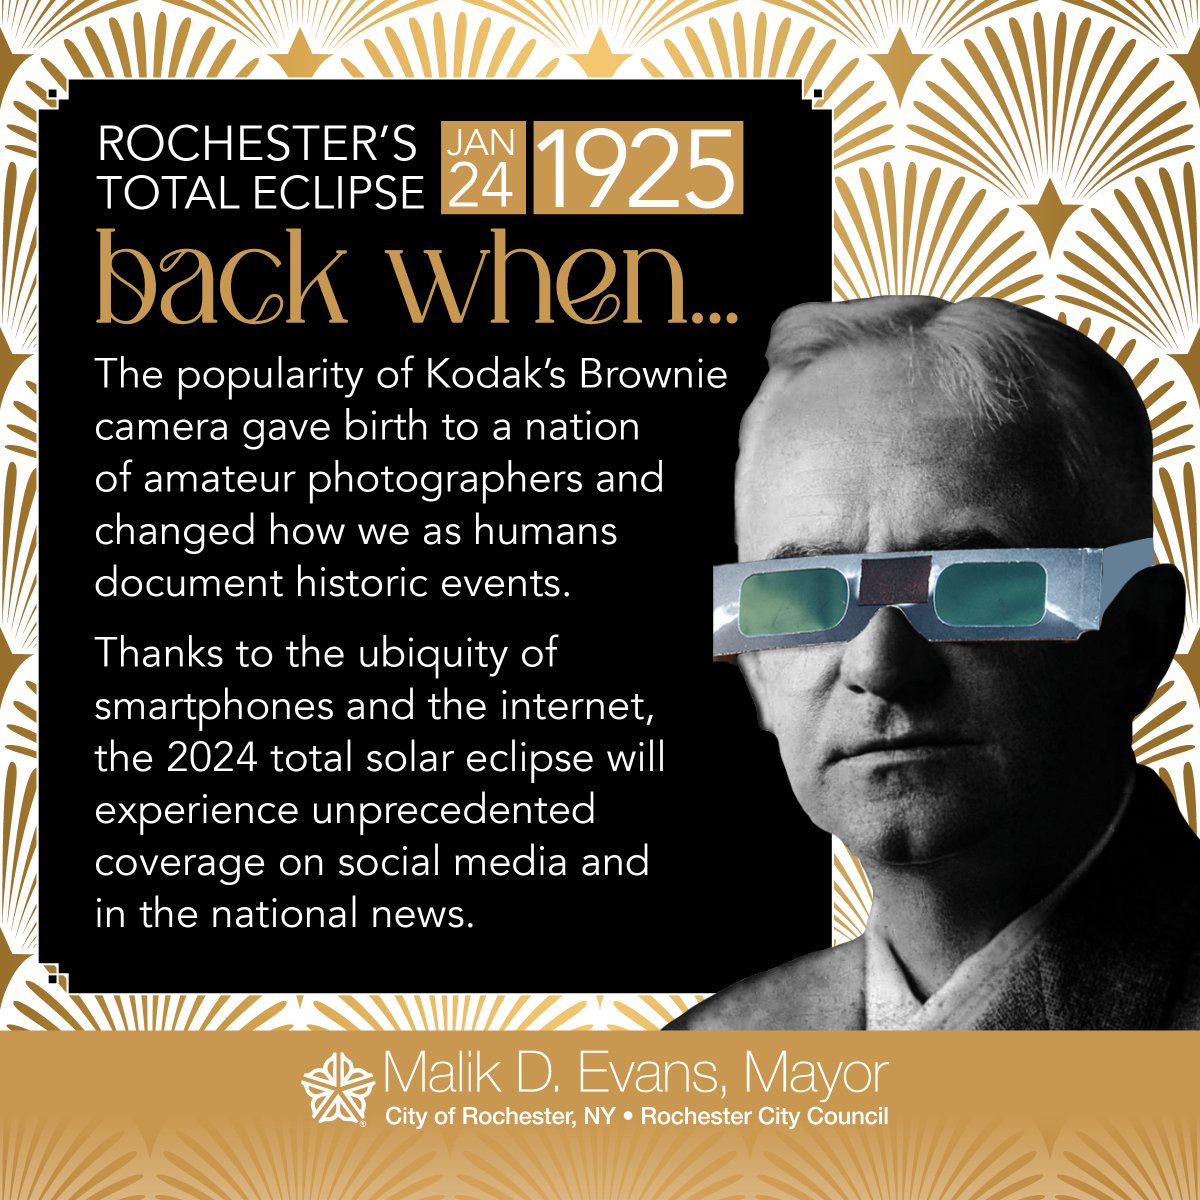 Clouds or sun, tomorrow is sure to be a great day to capture some unique images. #RochesterNY #SolarEclipse2024